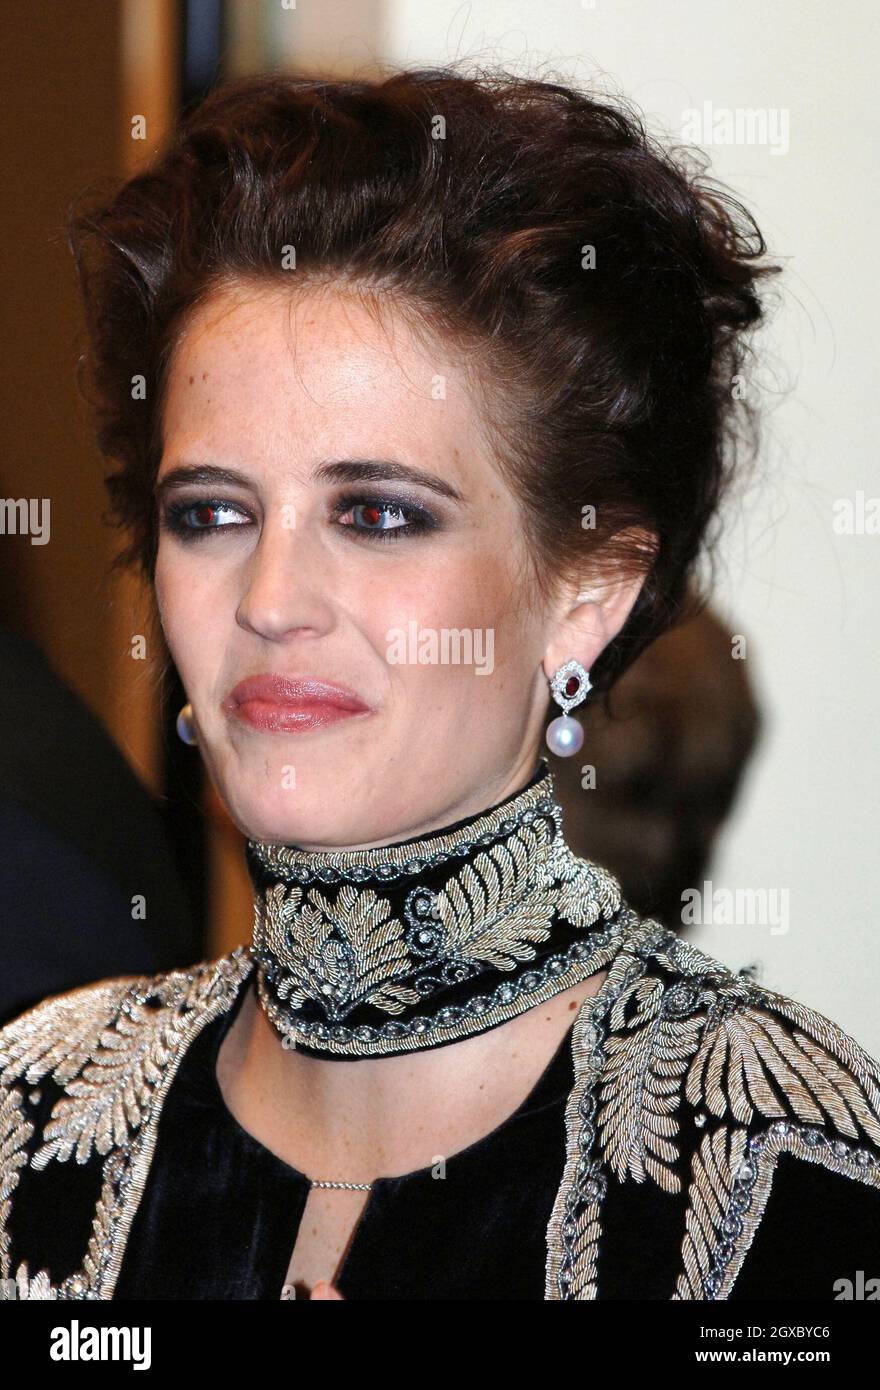 Eva Green at the Royal Premiere for the 21st Bond film 'Casino Royale' at the Odeon in Leicester Square, London on November 14, 2006. Anwar Hussein/EMPICS Entertainment  Stock Photo